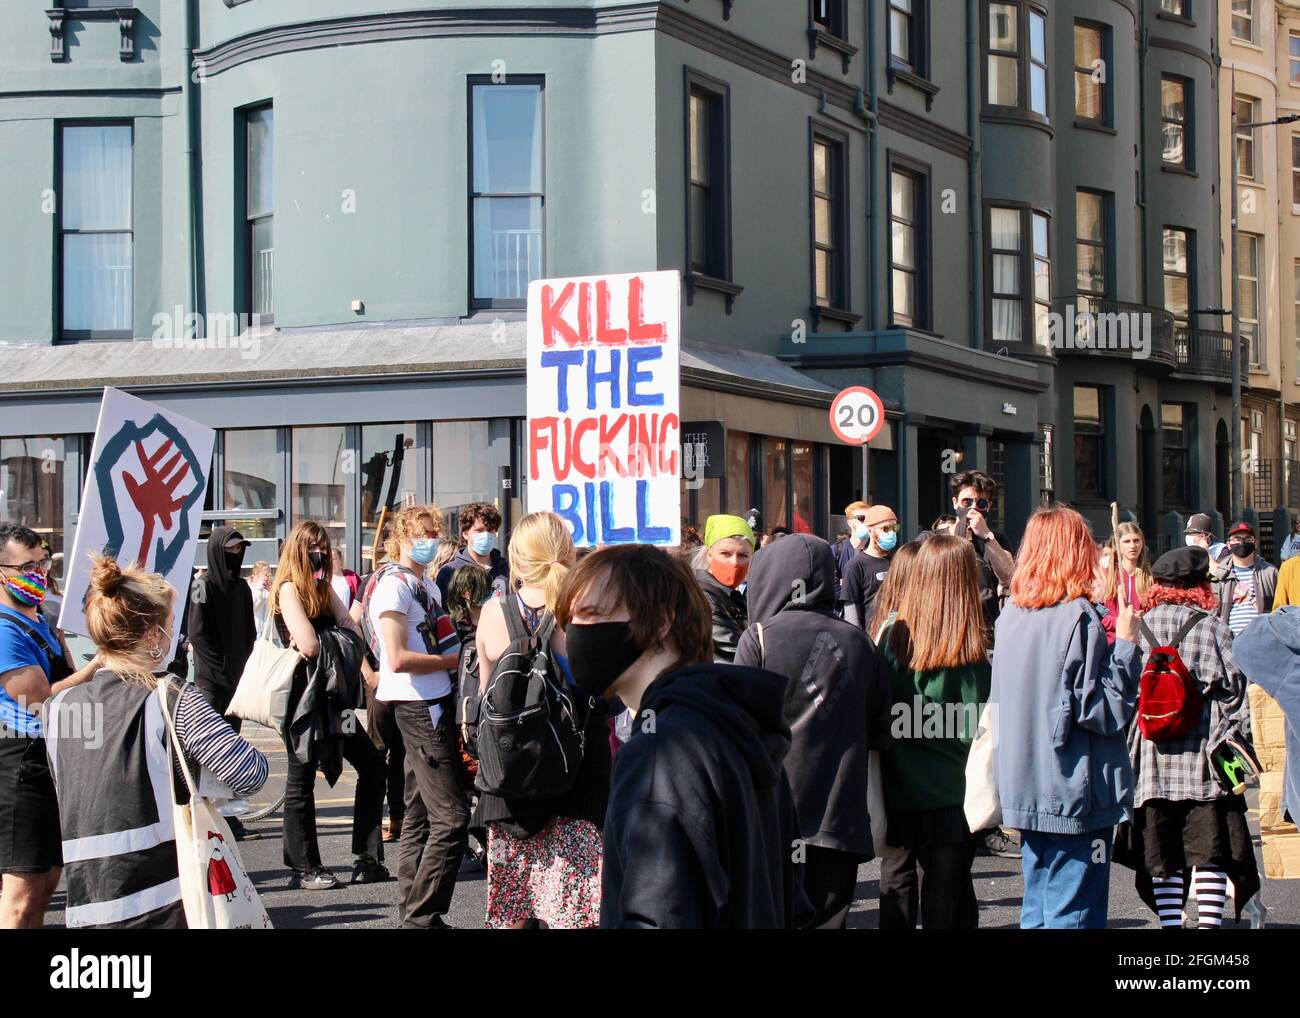 Demonstration against policing bill on the streets of Brighton, England, UK Stock Photo